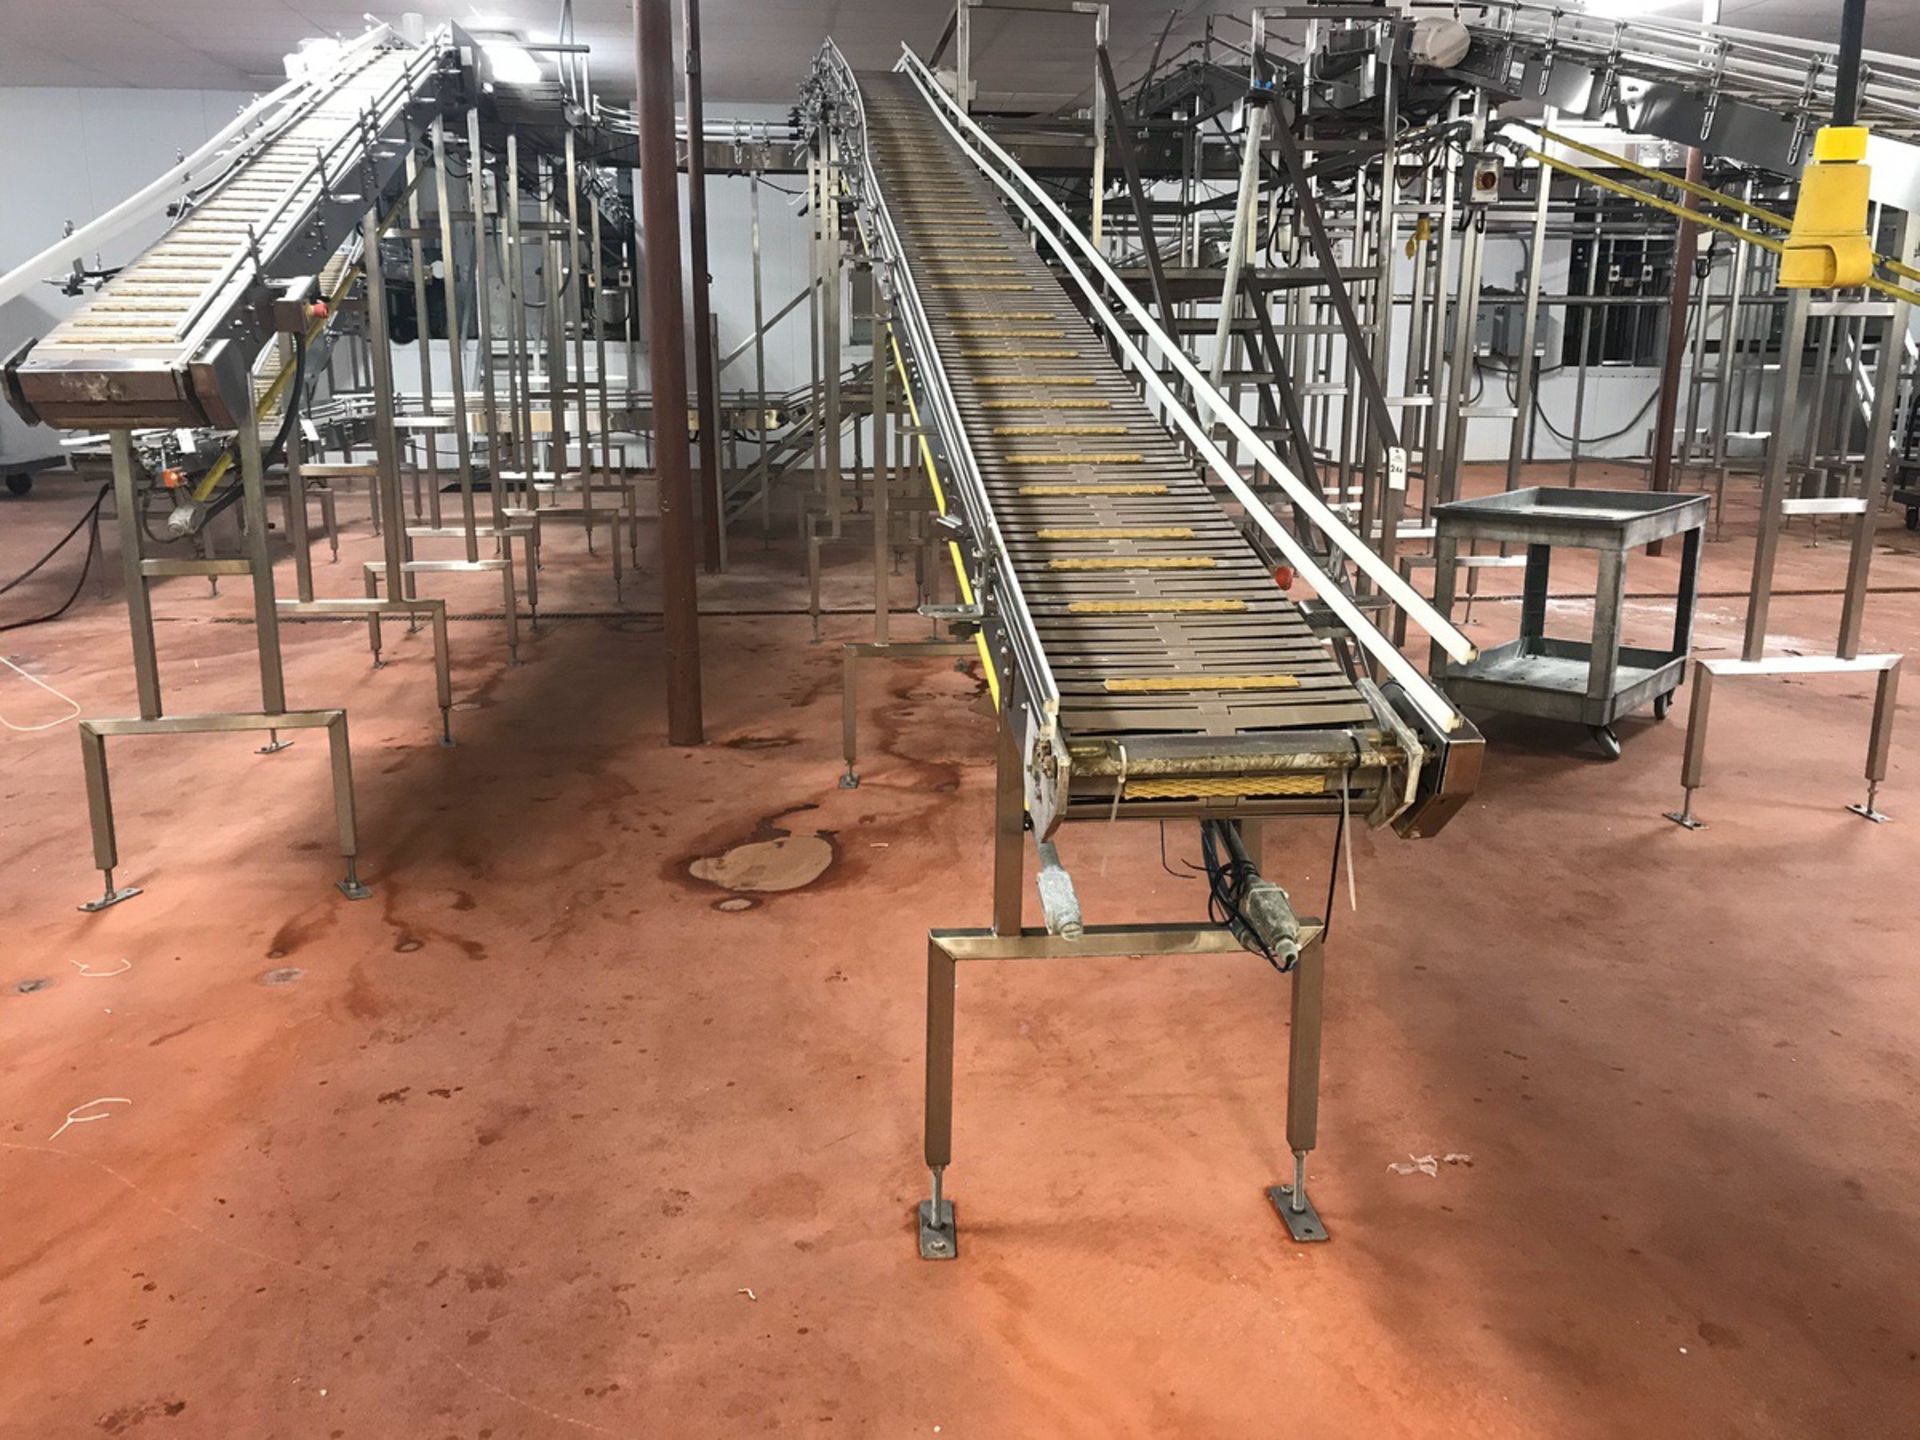 Stainless Steel Incline Conveyor, Approx 15in Wide x 20ft Long | Rig Fee: $250